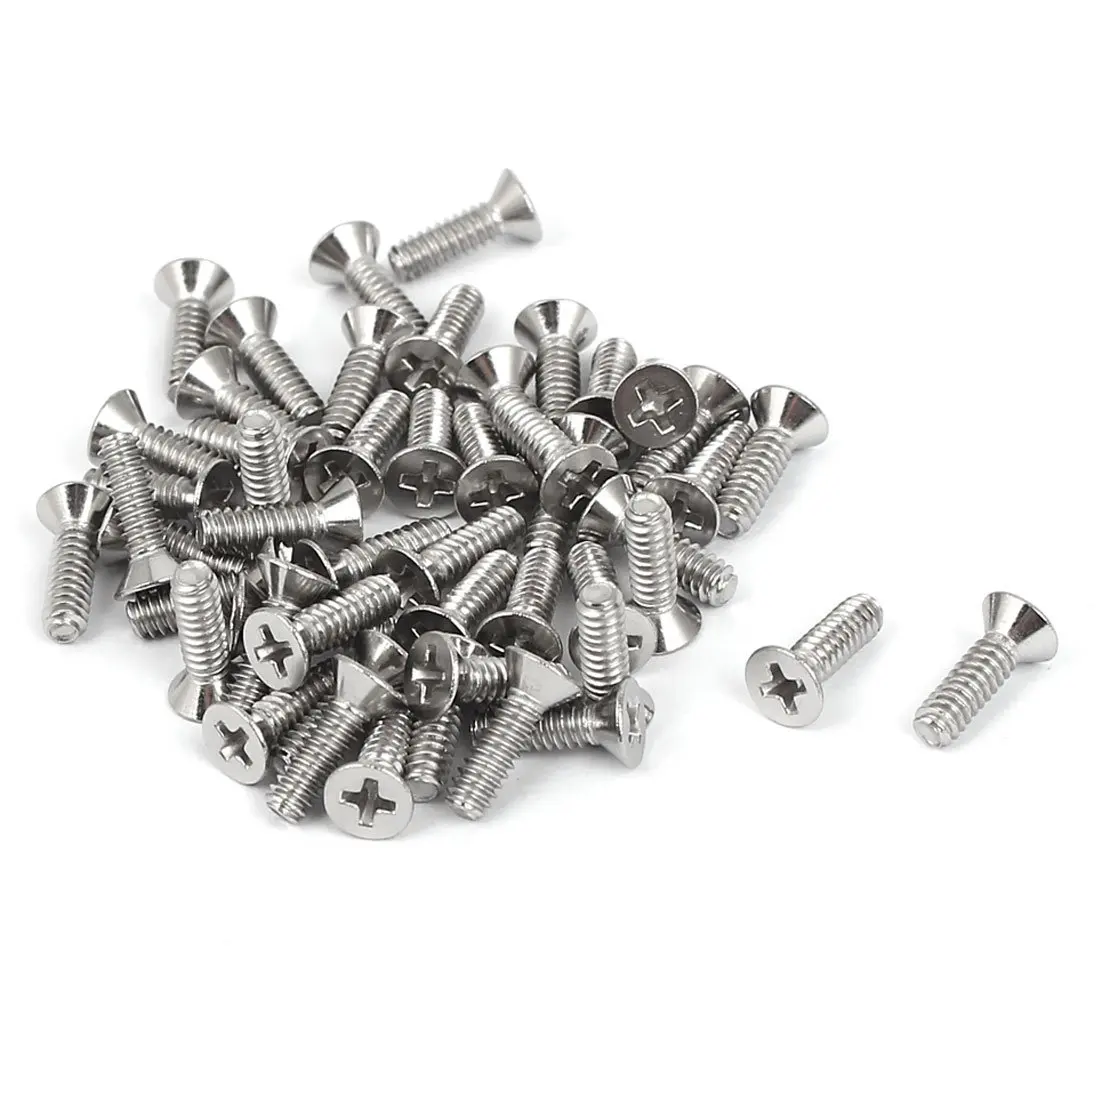 

Keszoox A15123100ux0350 4#-40x3/8inch Phillips Flat Countersunk Head Screws (Pack of 50)